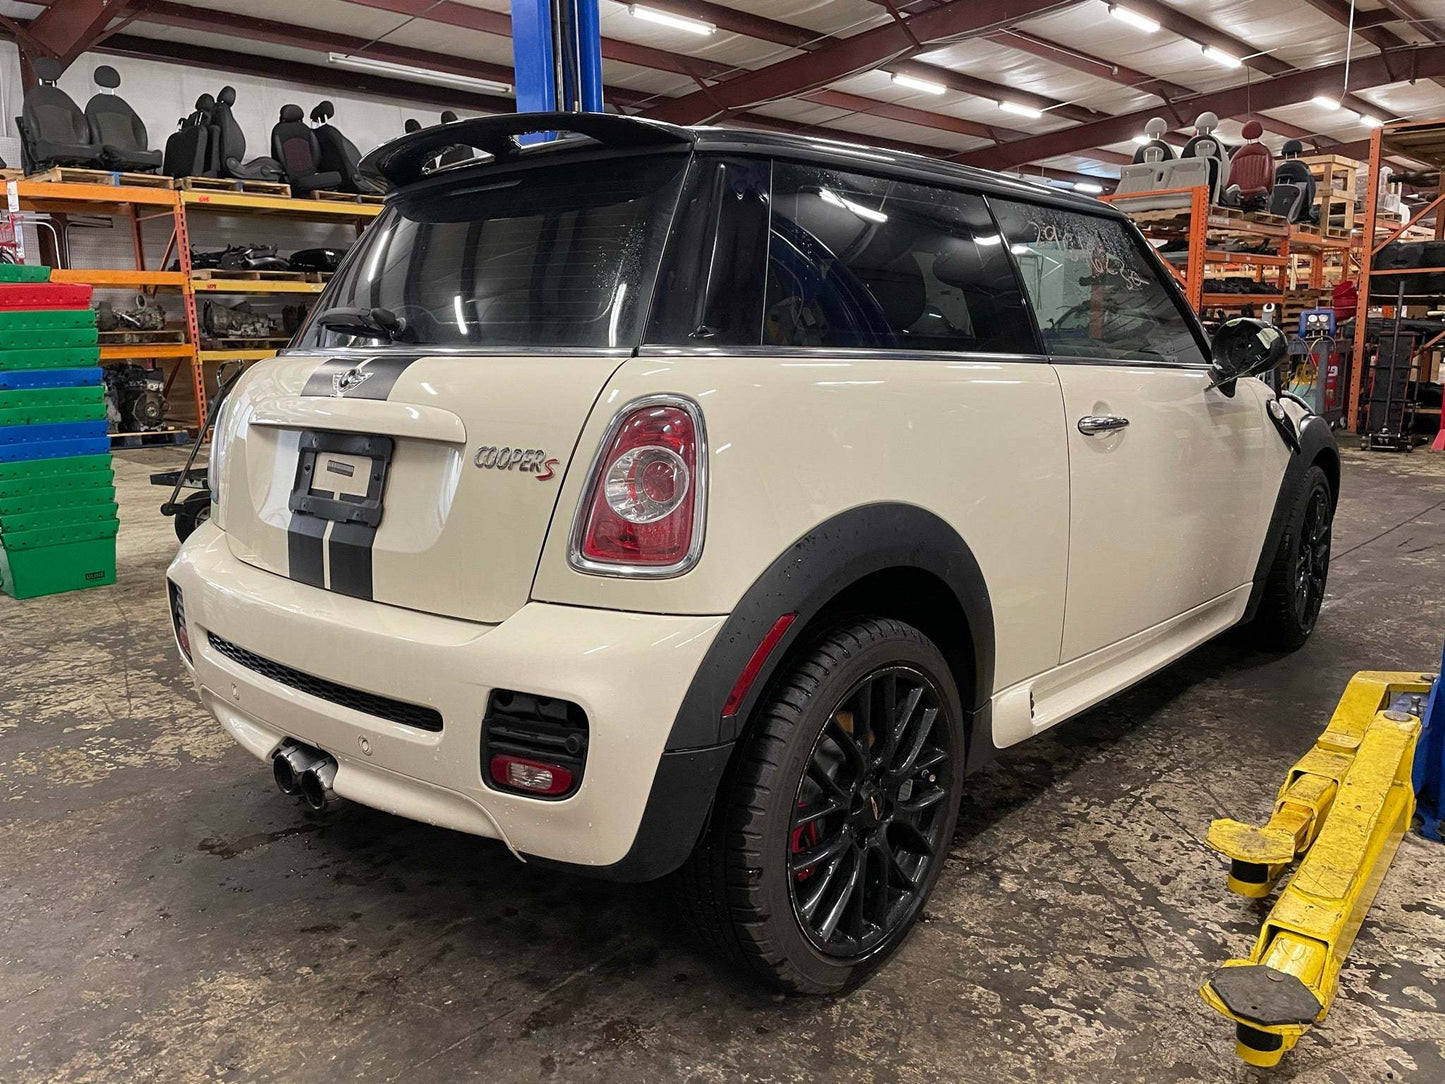 2012 MINI Cooper Hatchback S with JCW Package, New Parts Car (April 2021) Stk # 231